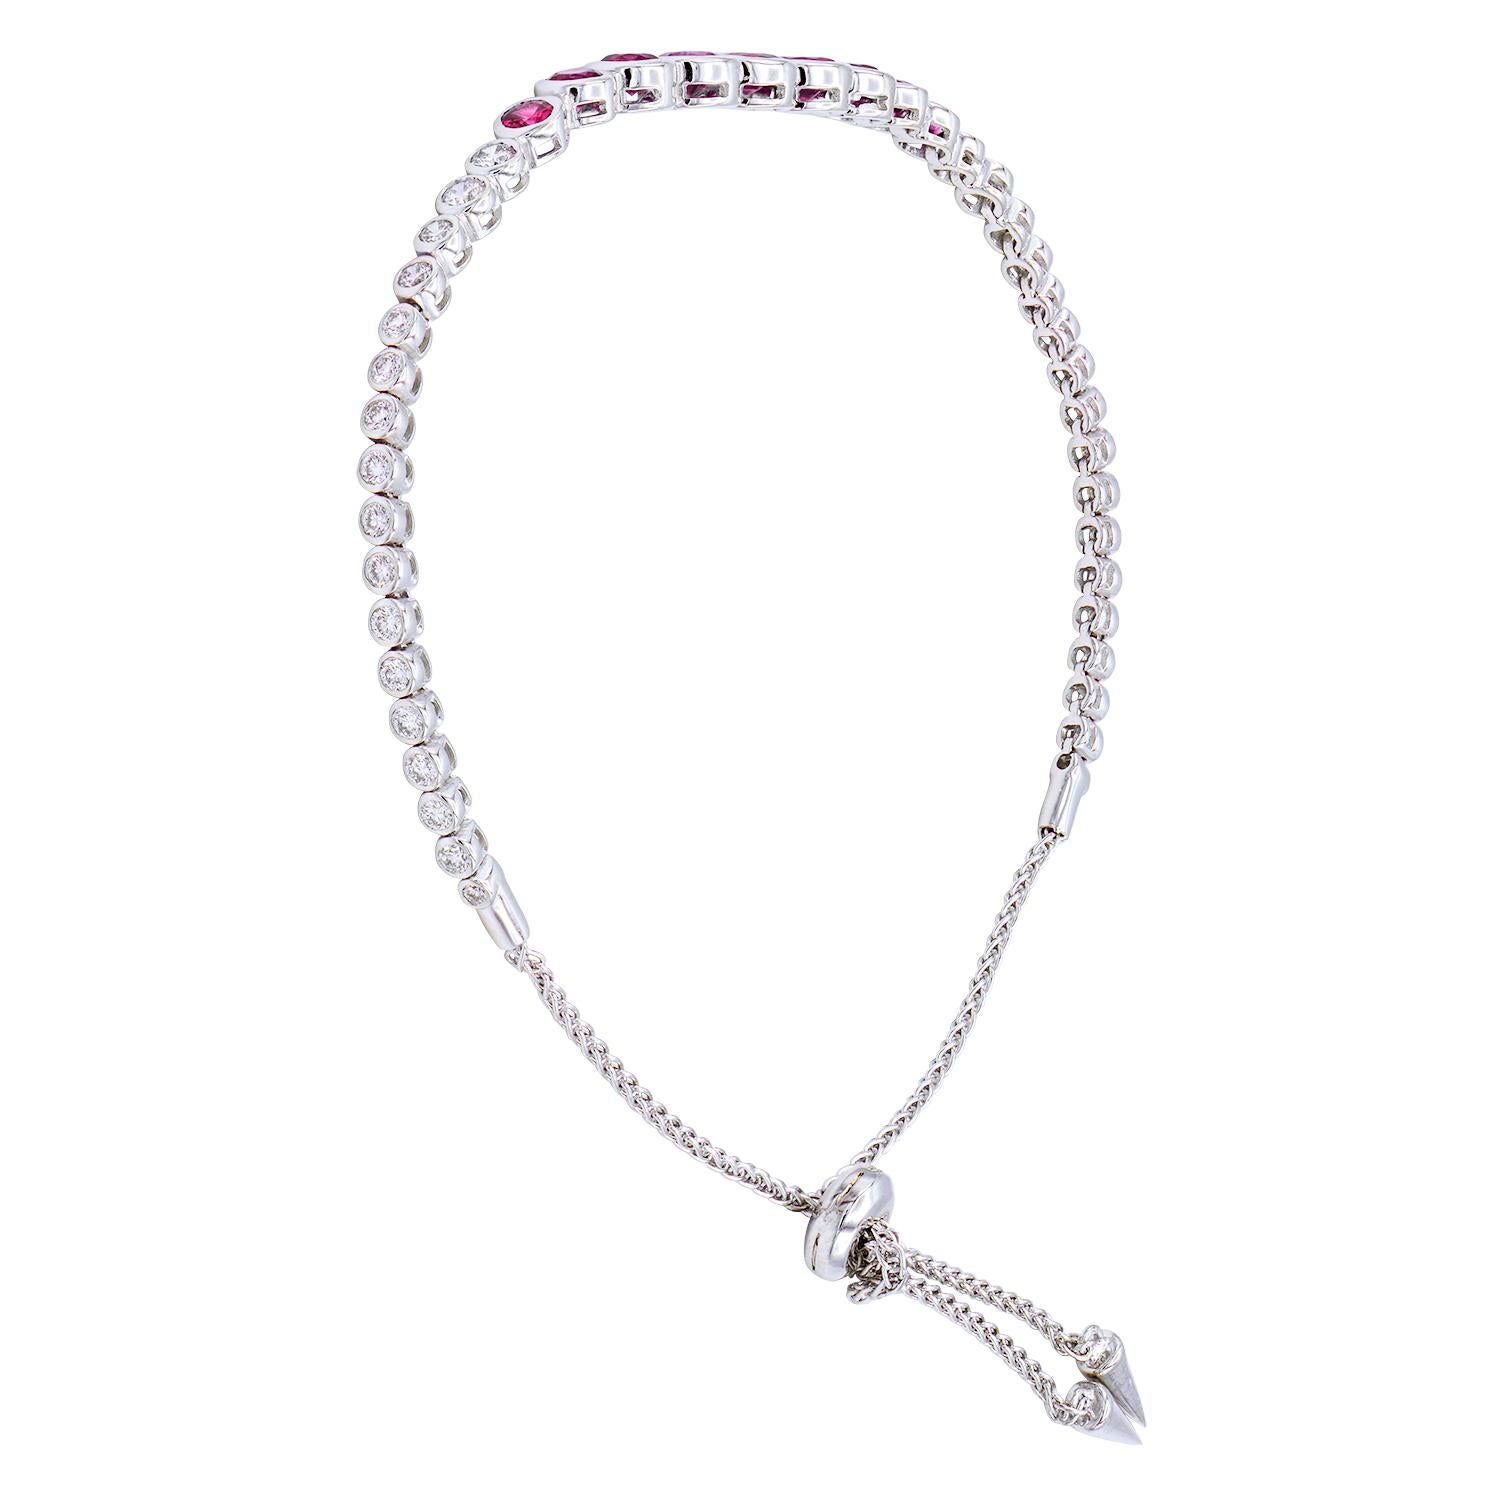 This fun and beautiful bracelet is gorgeous alone or stacked with others. This bracelet has 9 Rubys graduated towards the center totaling 1.94 carats, with VS2, G color diamonds on both sides or the rubys. There are 34 round diamonds totaling 0.64